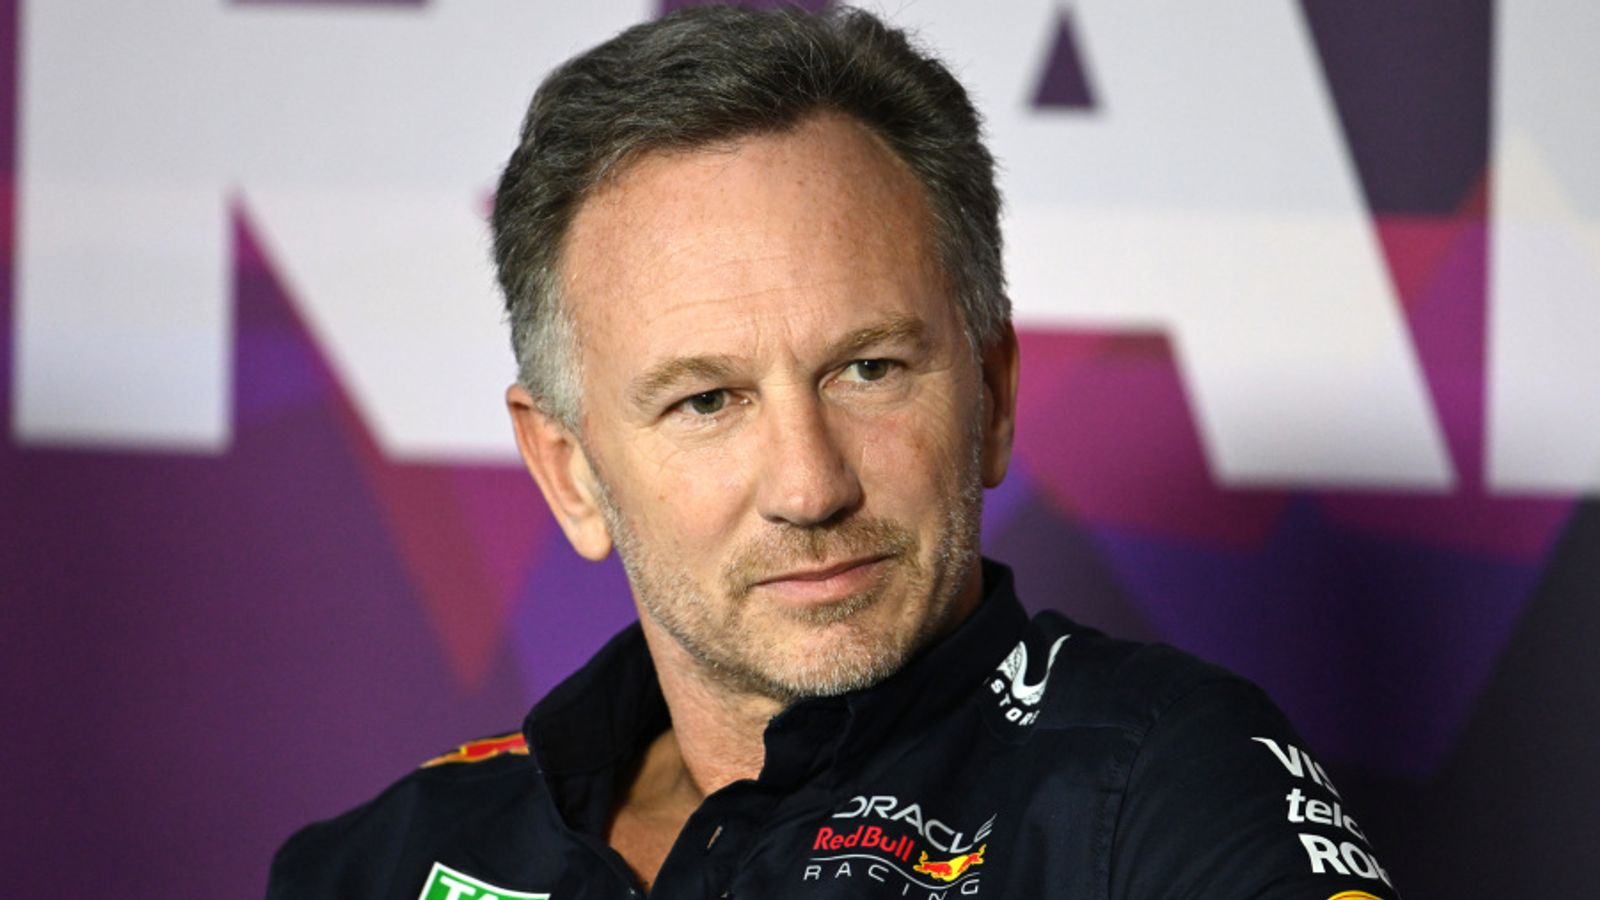 Christian Horner: Investigation into Red Bull team principal expected to be resolved before Bahrain GP | F1 News